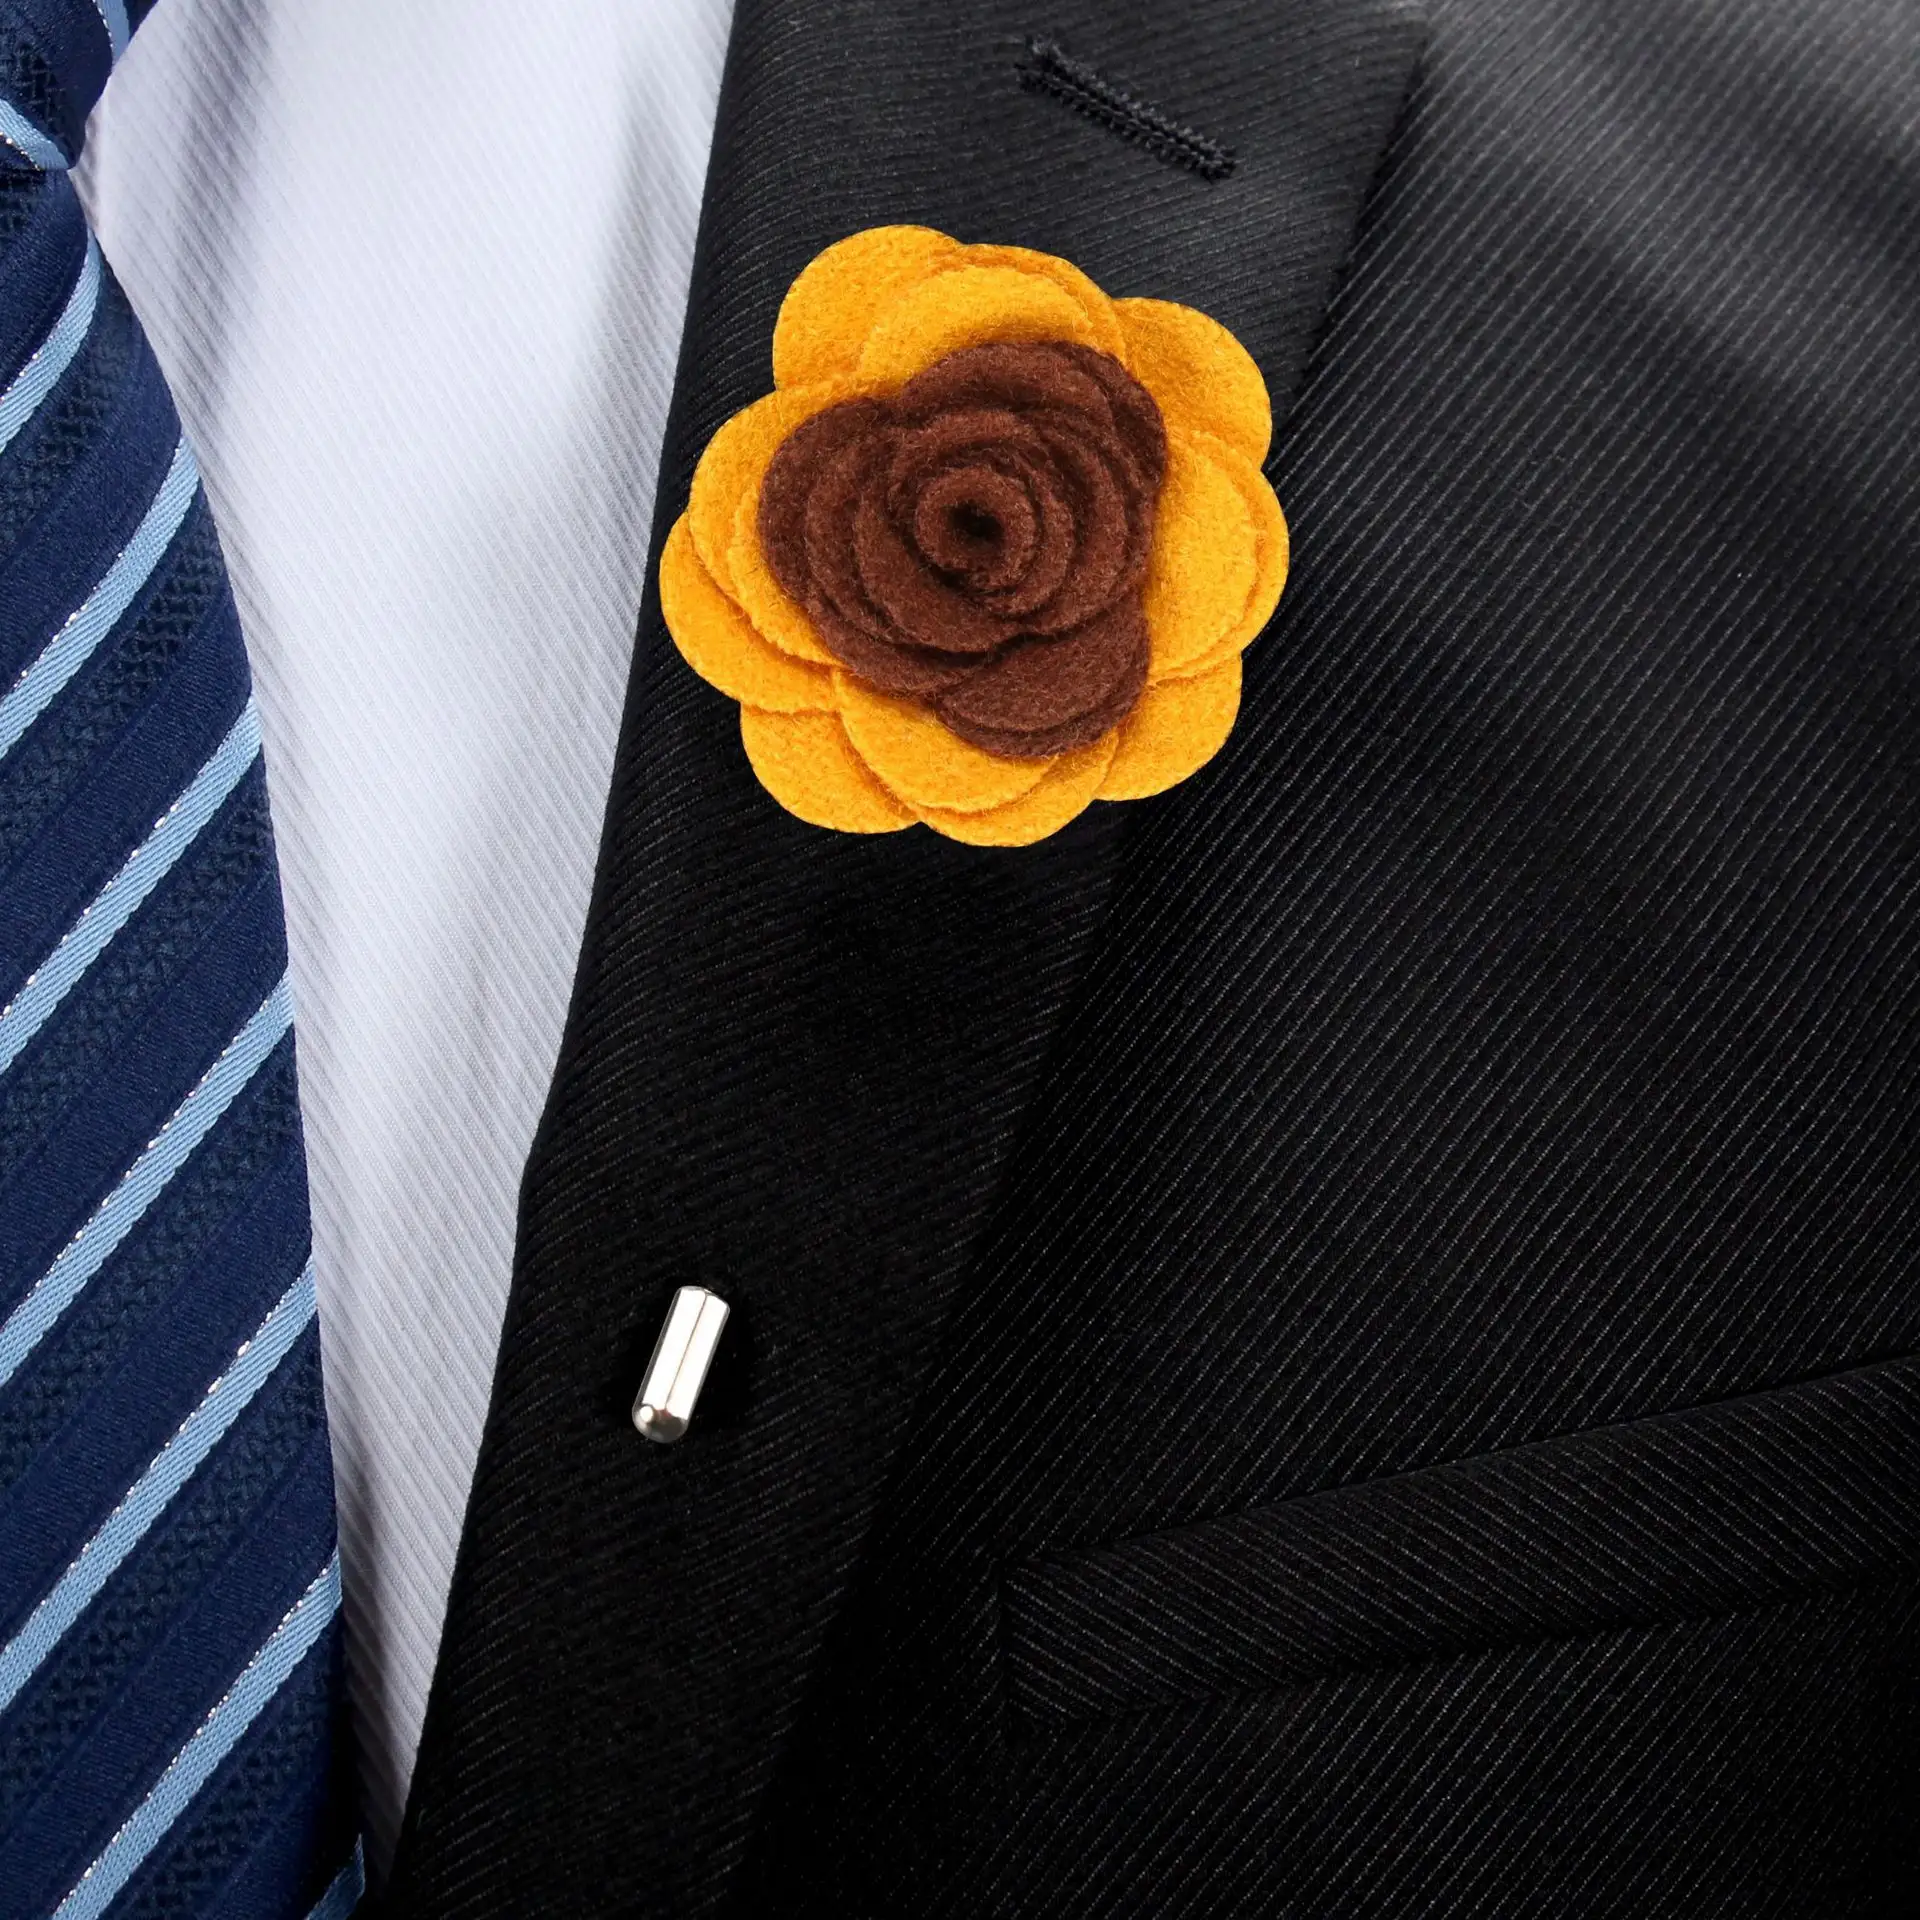 Pure handmade exquisite two-color flannel corsage men's suit flower designer brooch pins jewelry